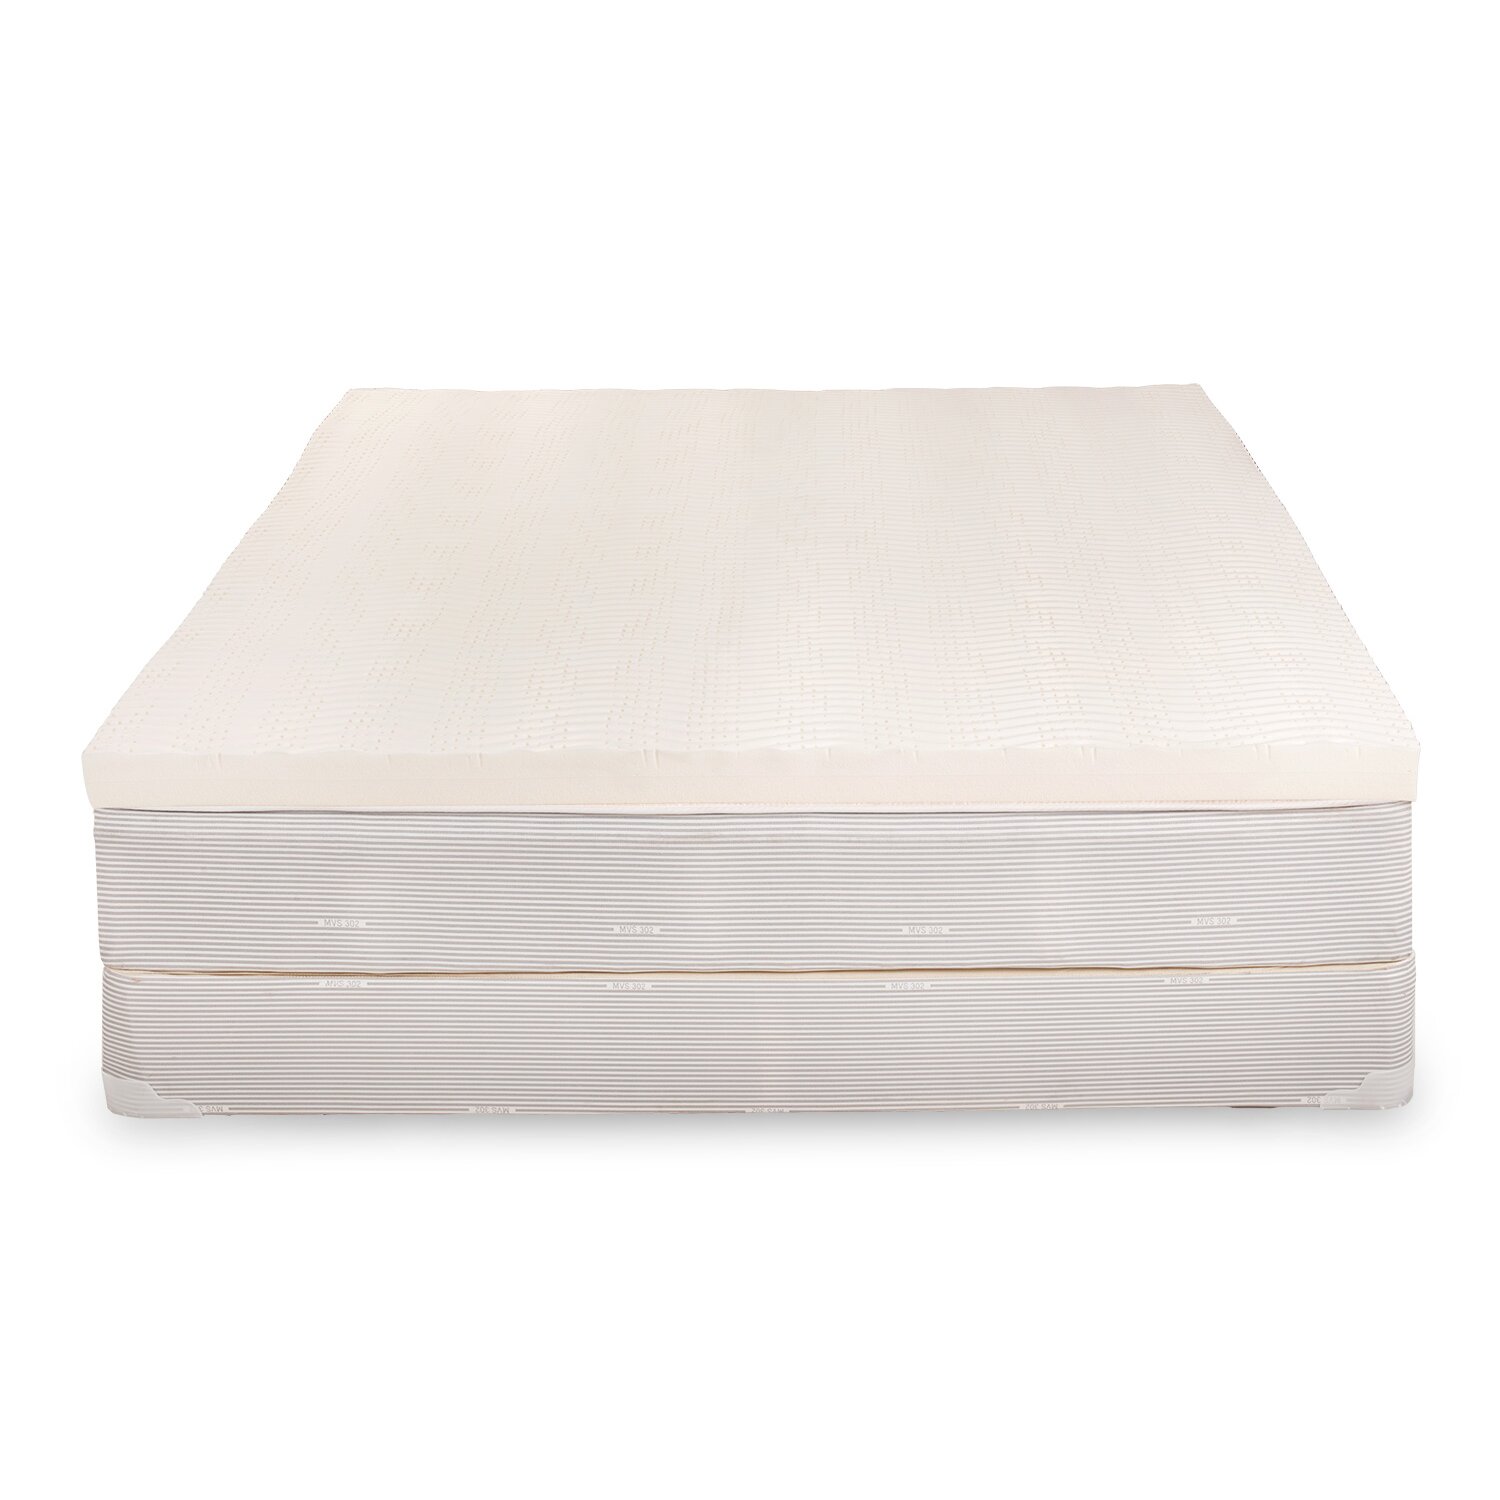 Latex Mattress Toppers Reviews 72